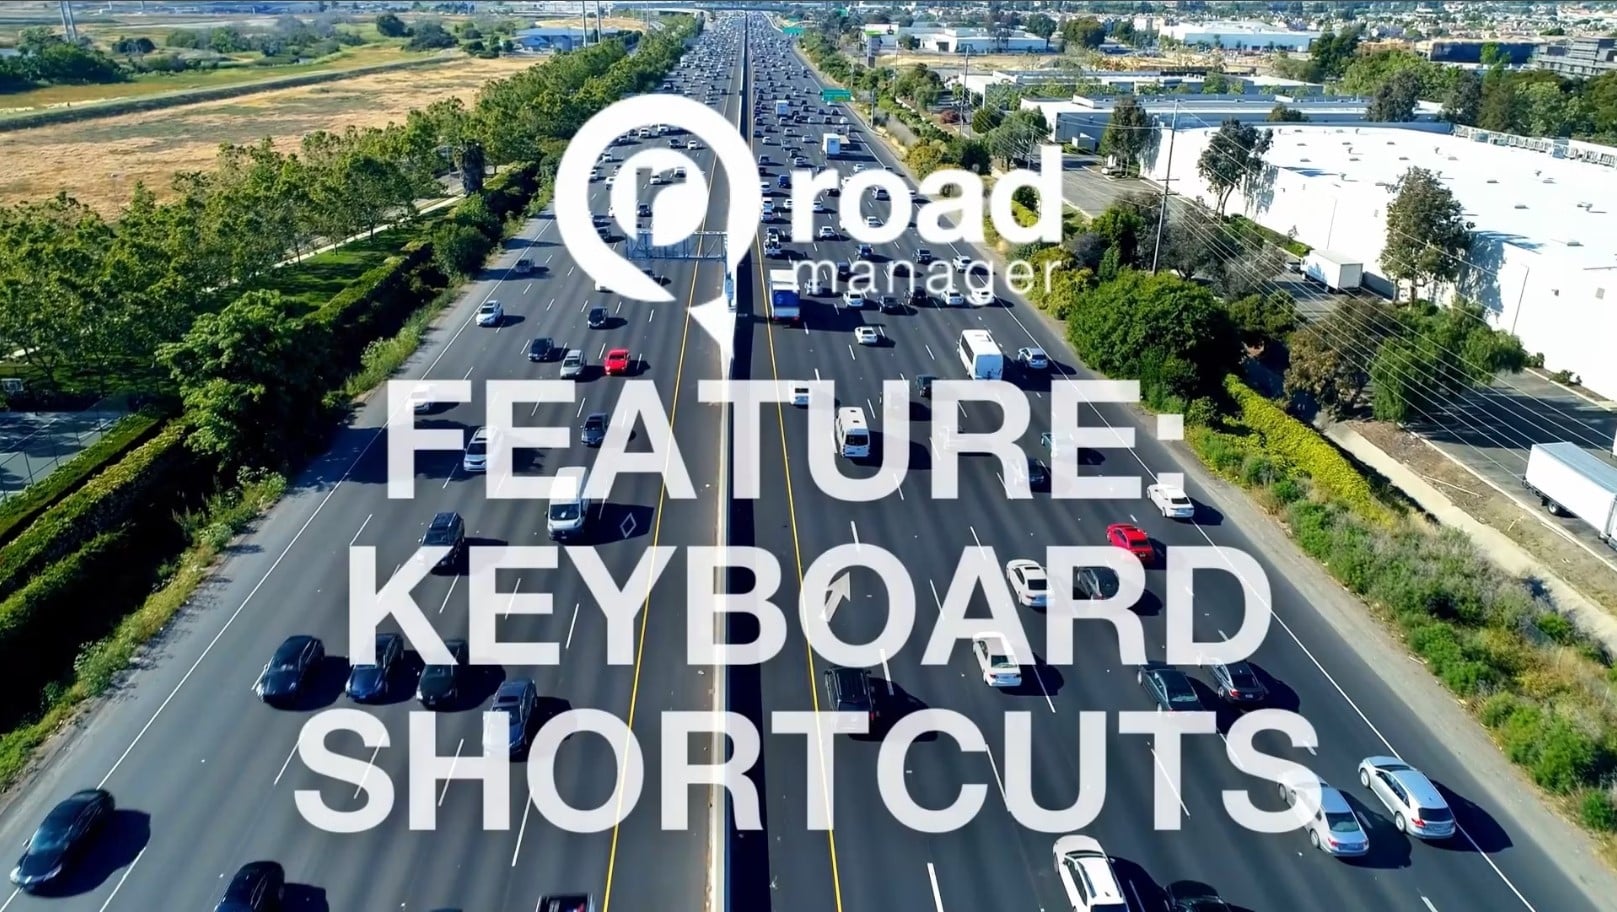 Use keyboard shortcuts to use the Road Manager traffic app effectively.